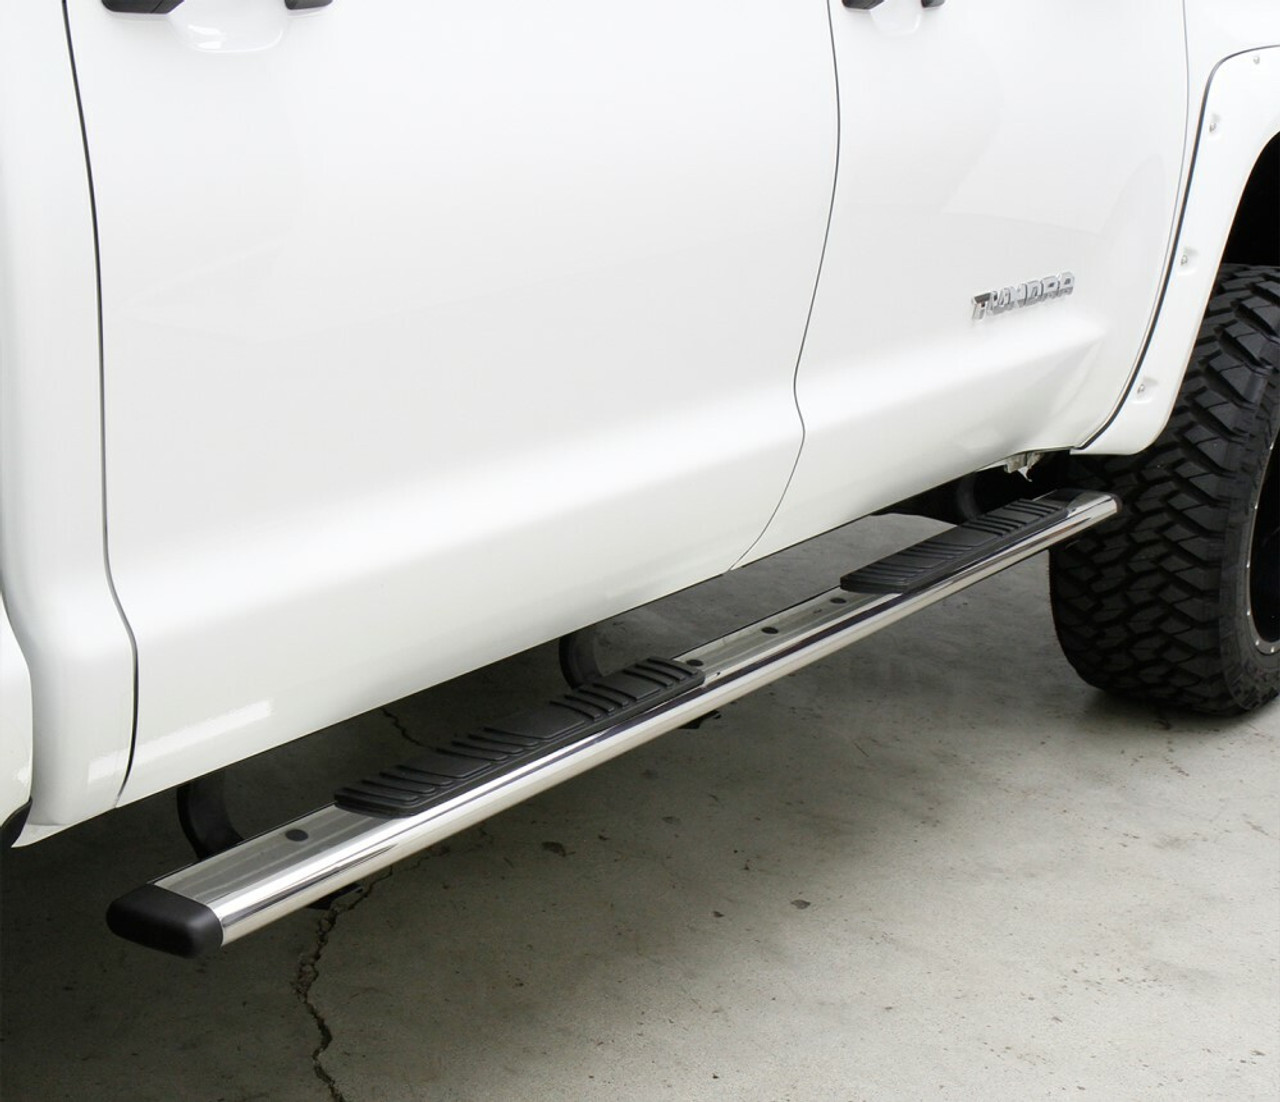 Go Rhino 685449987T RAM, 1500, 2019 - 2021, 5 inch OE Xtreme Low Profile - Complete Kit: Galvanized Steel, Textured black, 650087T side bars + 6844995 OE Xtreme Brackets. 5 inch wide x 87 inch long side bars, New Body Style Only